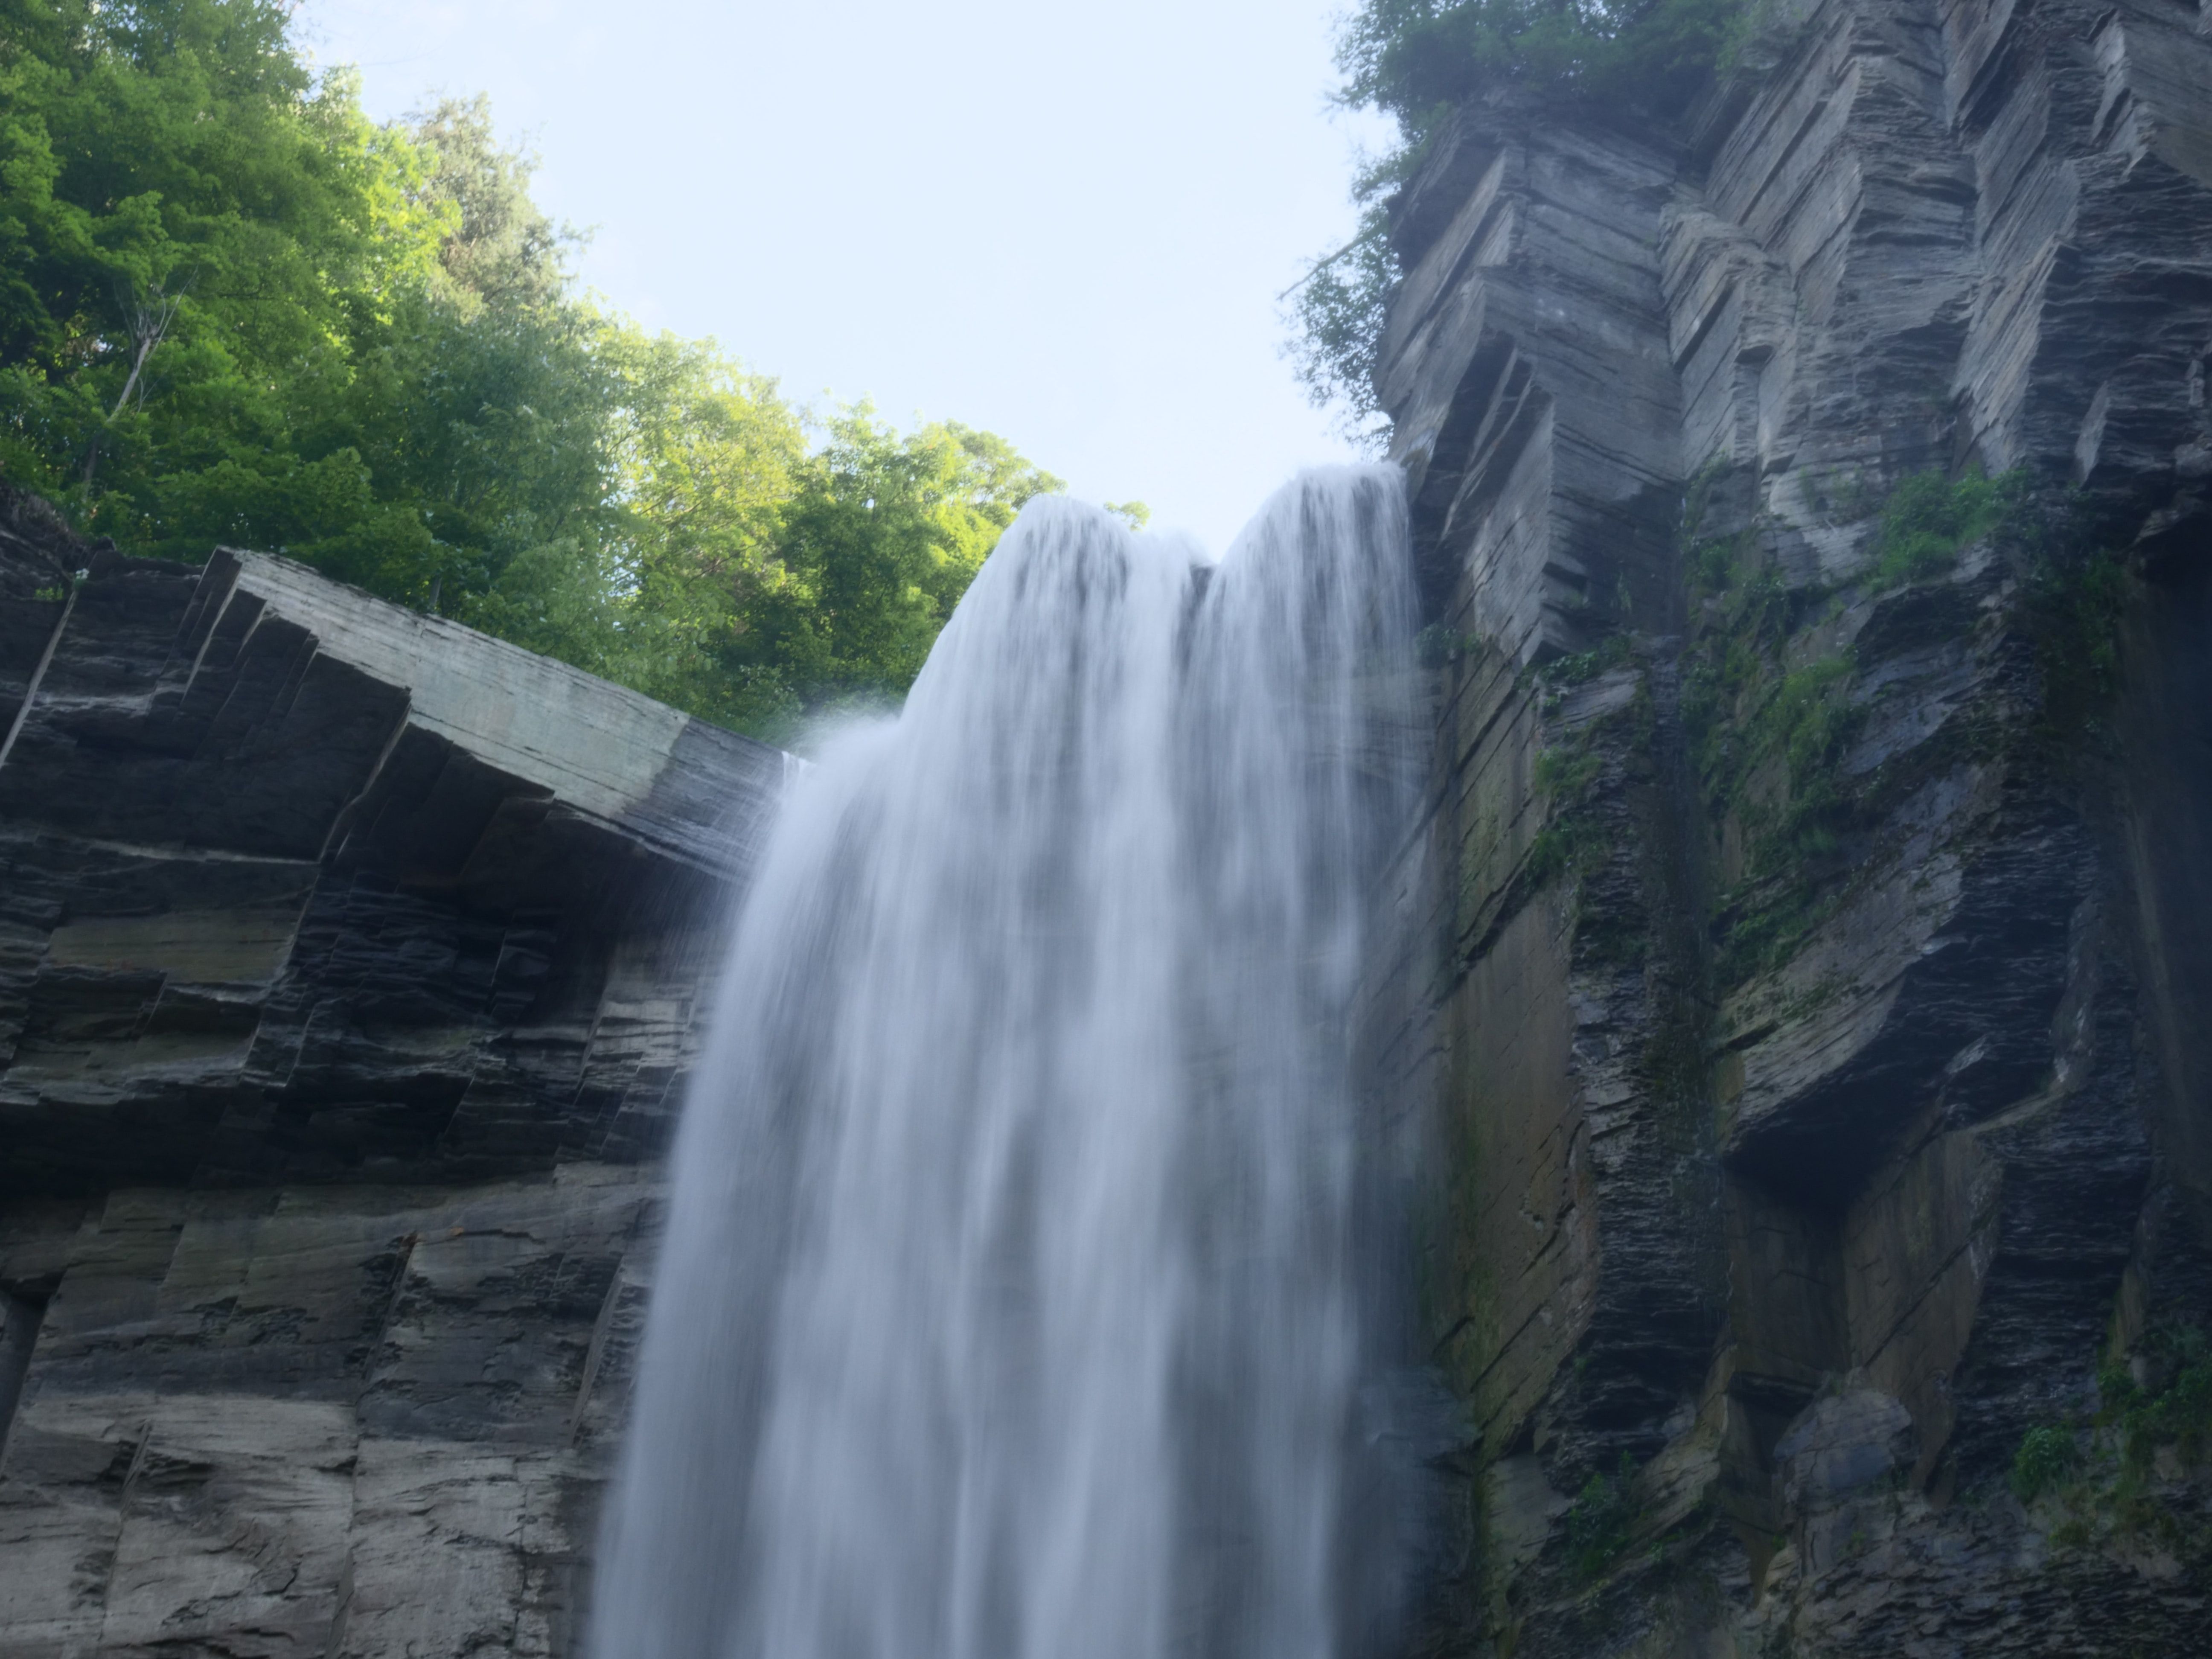 Taughannock Fall State Park - the tallest waterfall east of the Mississippi, campsites and picturesque surroundings